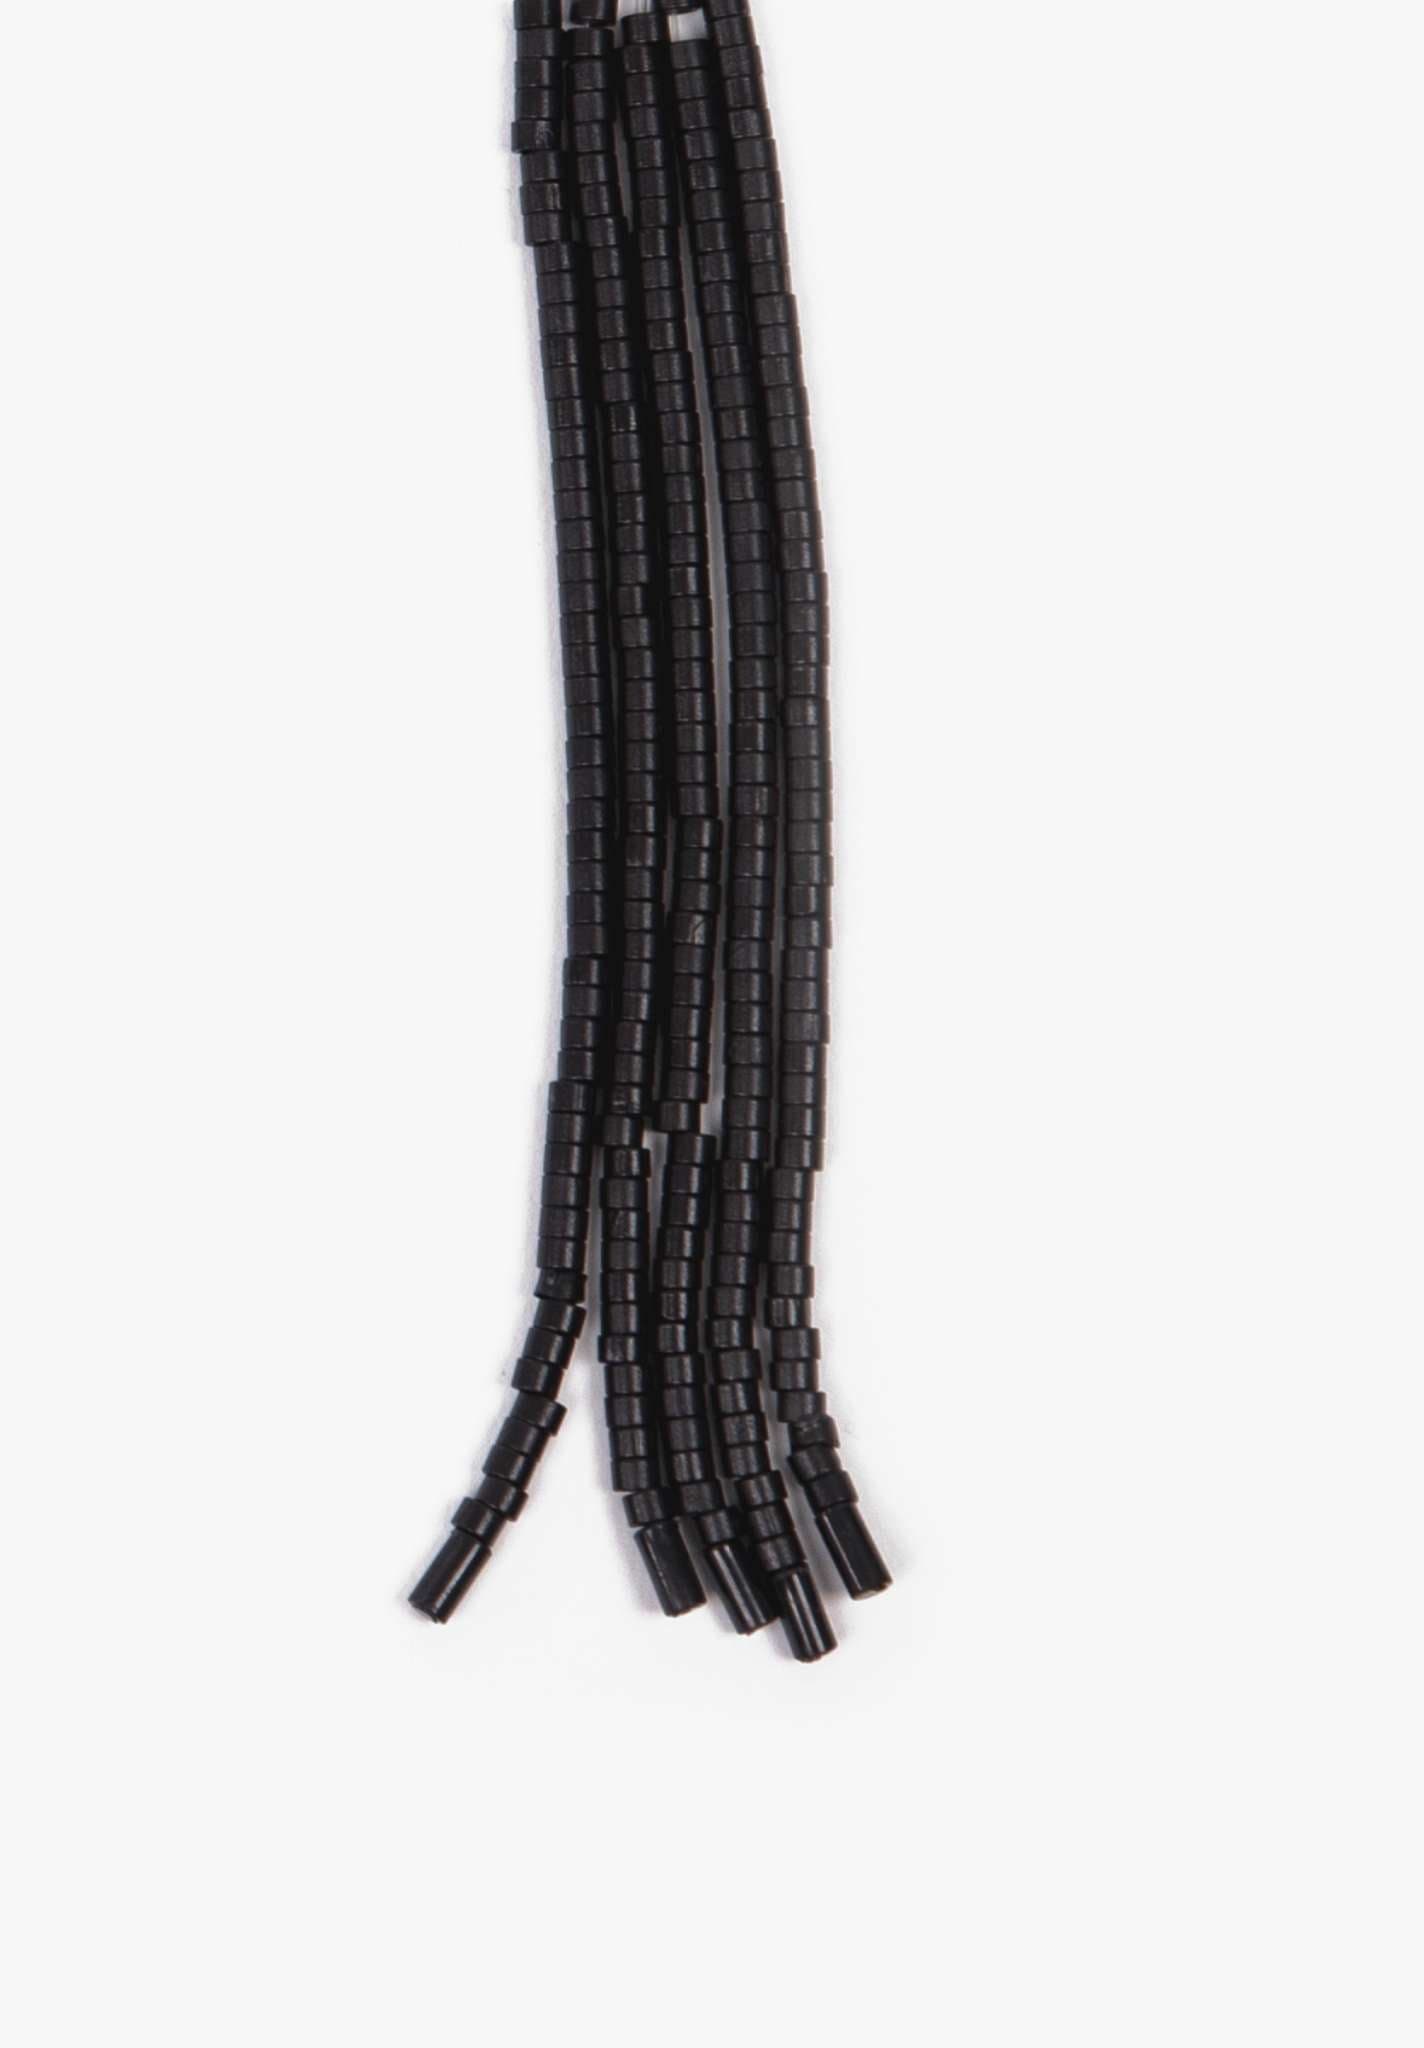 Silicone Pre-Loaded Extension Beads - Donna Bella Hair